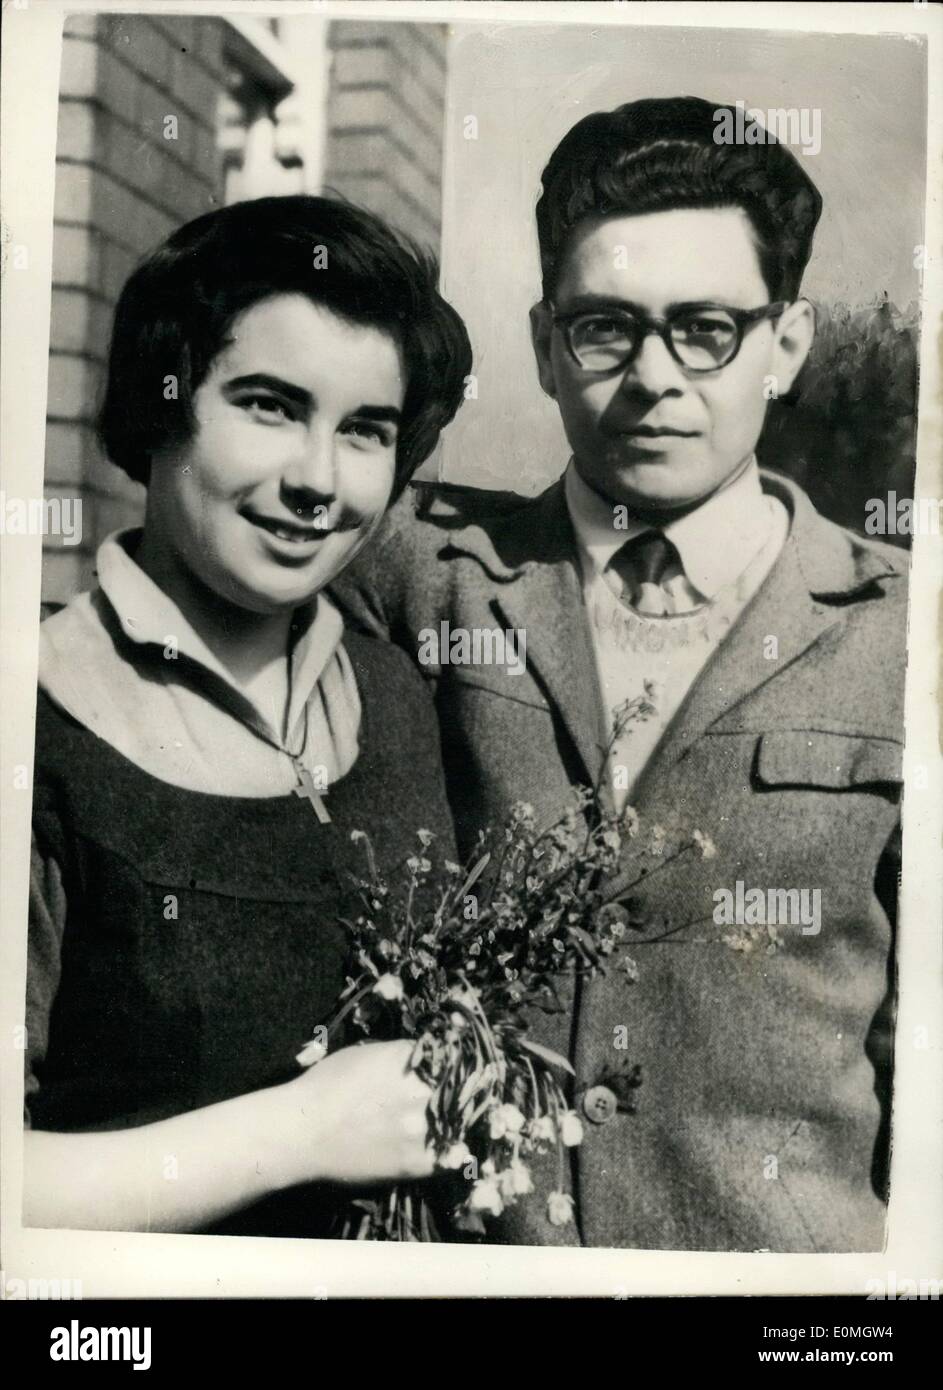 May 05, 1955 - Diplomats daughter Elopes to Gretna Green...Her Father is Brazilian Vice Cousul in Paris: Nineteen year old Lilliana Penna - daughter of Brazil's Vice-Consul in Paris eloped to Gretna Green with twenty two year old Reginaldo Carvalho - the music composer son of a Brazilian manufacture in Marseilles... She told her father that she was going for a swim - instead of which she and her sweetheart traveled to Gretna Green - and they hope to marry thereon June 16th Stock Photo